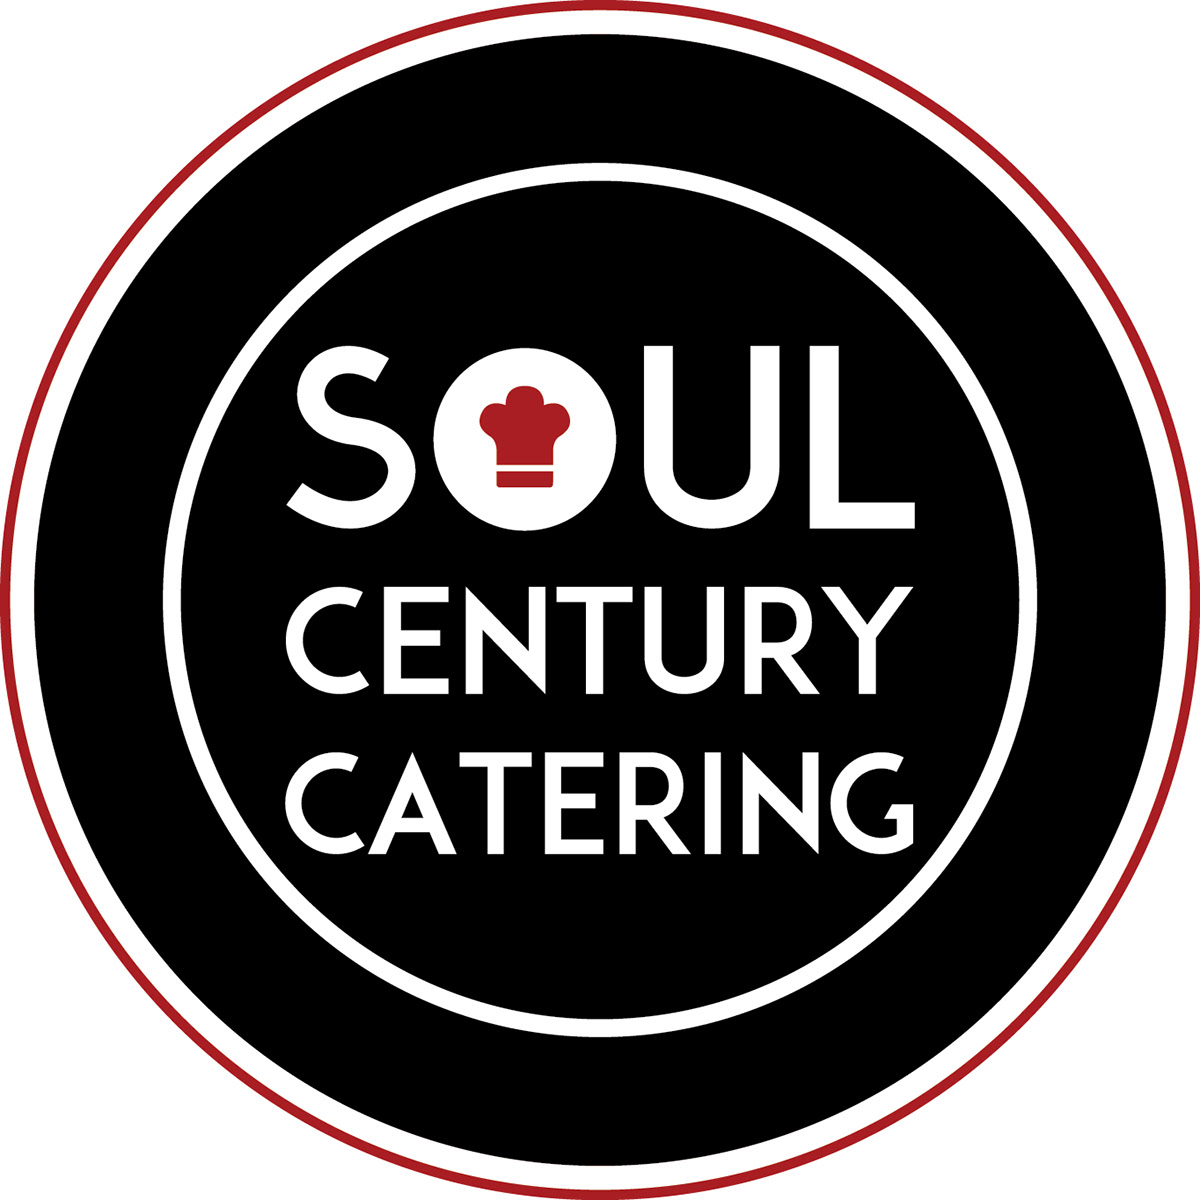 catering Soul Century soul Century chef chef logo